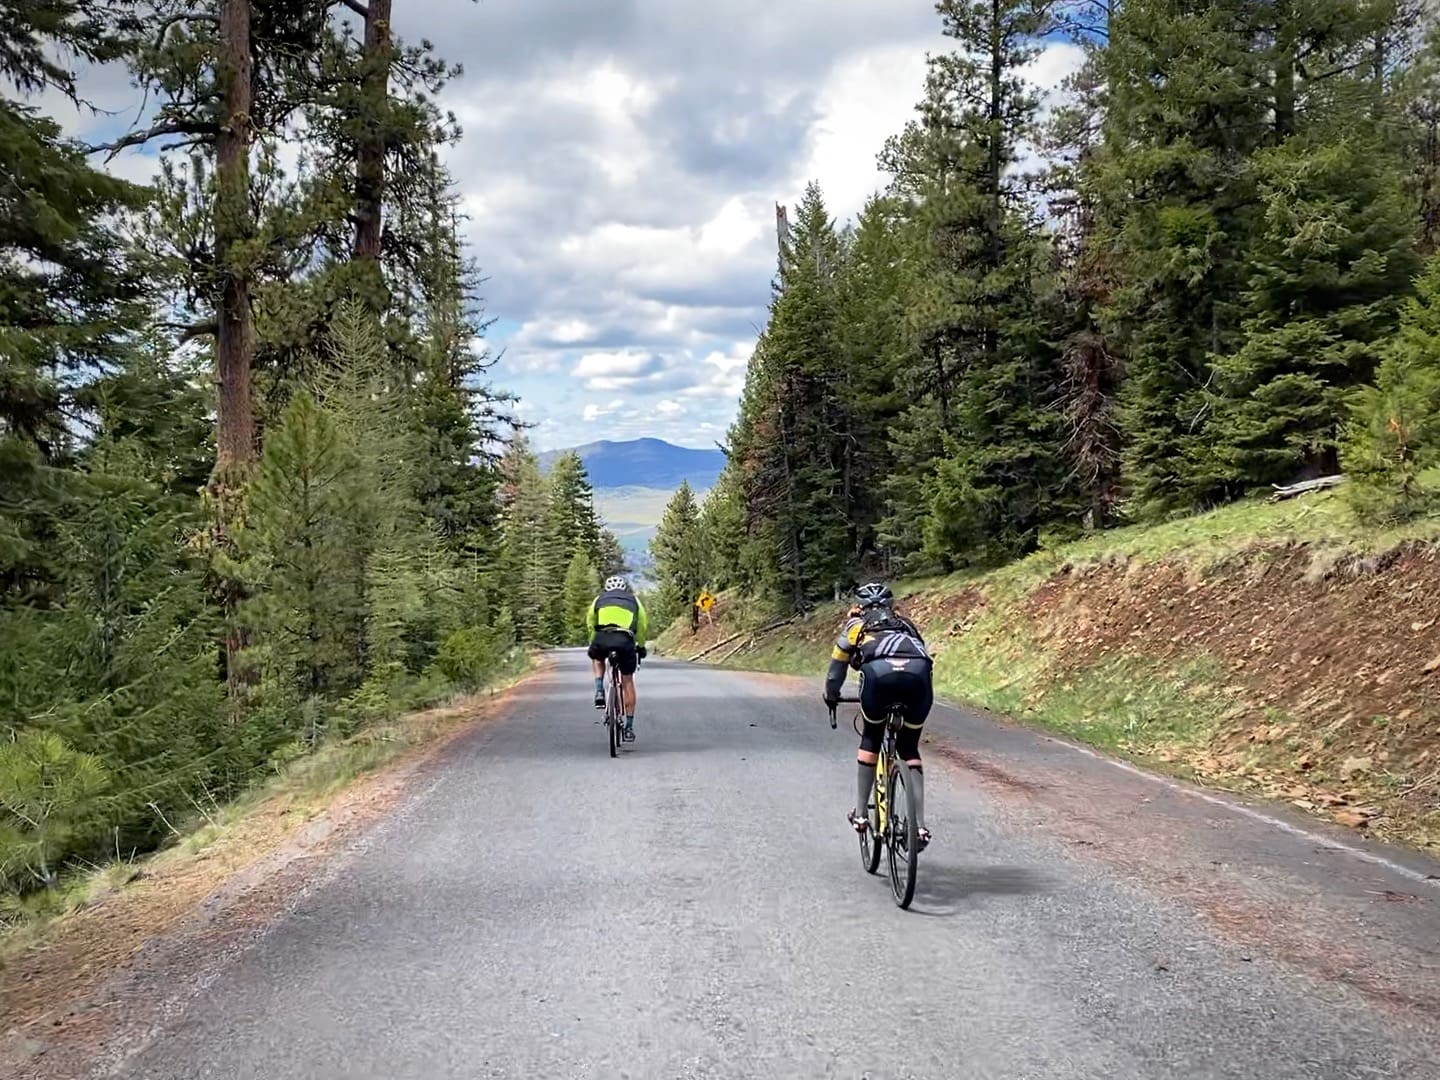 Two cyclists descending NF-12 in the Ochoco Mountains.